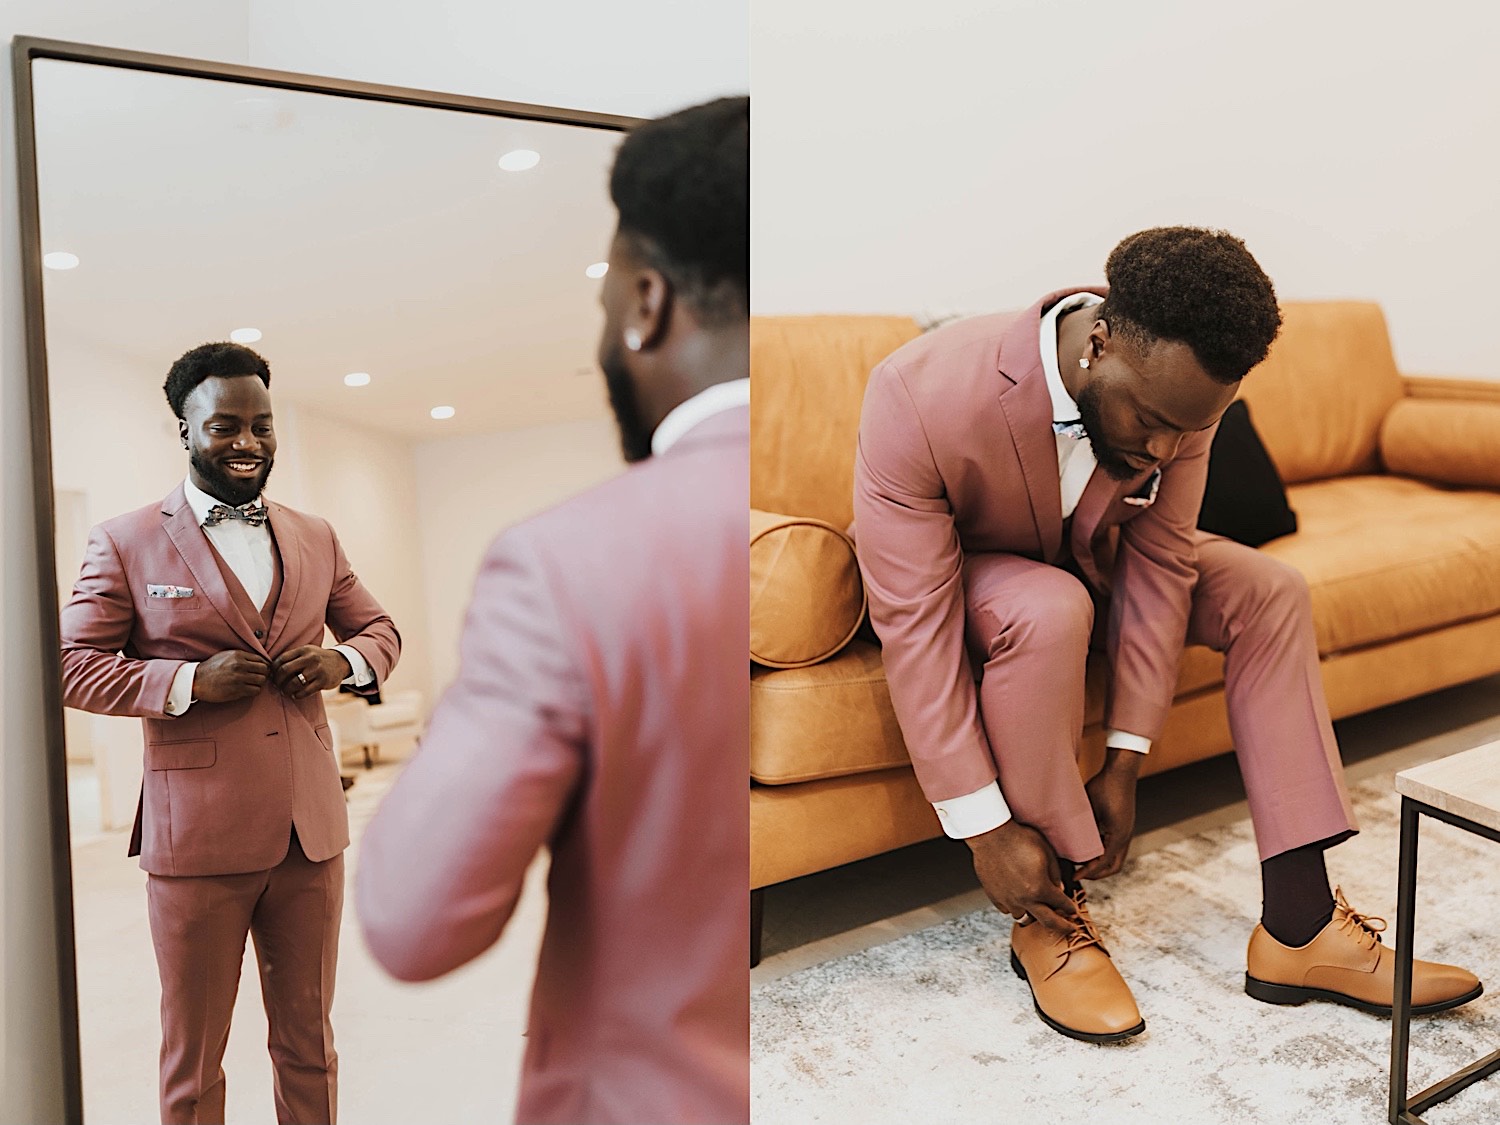 2 photos side by side, the left is of a groom standing in a mirror adjusting his suit coat, the right photo is of the groom sitting on a couch adjusting his shoes